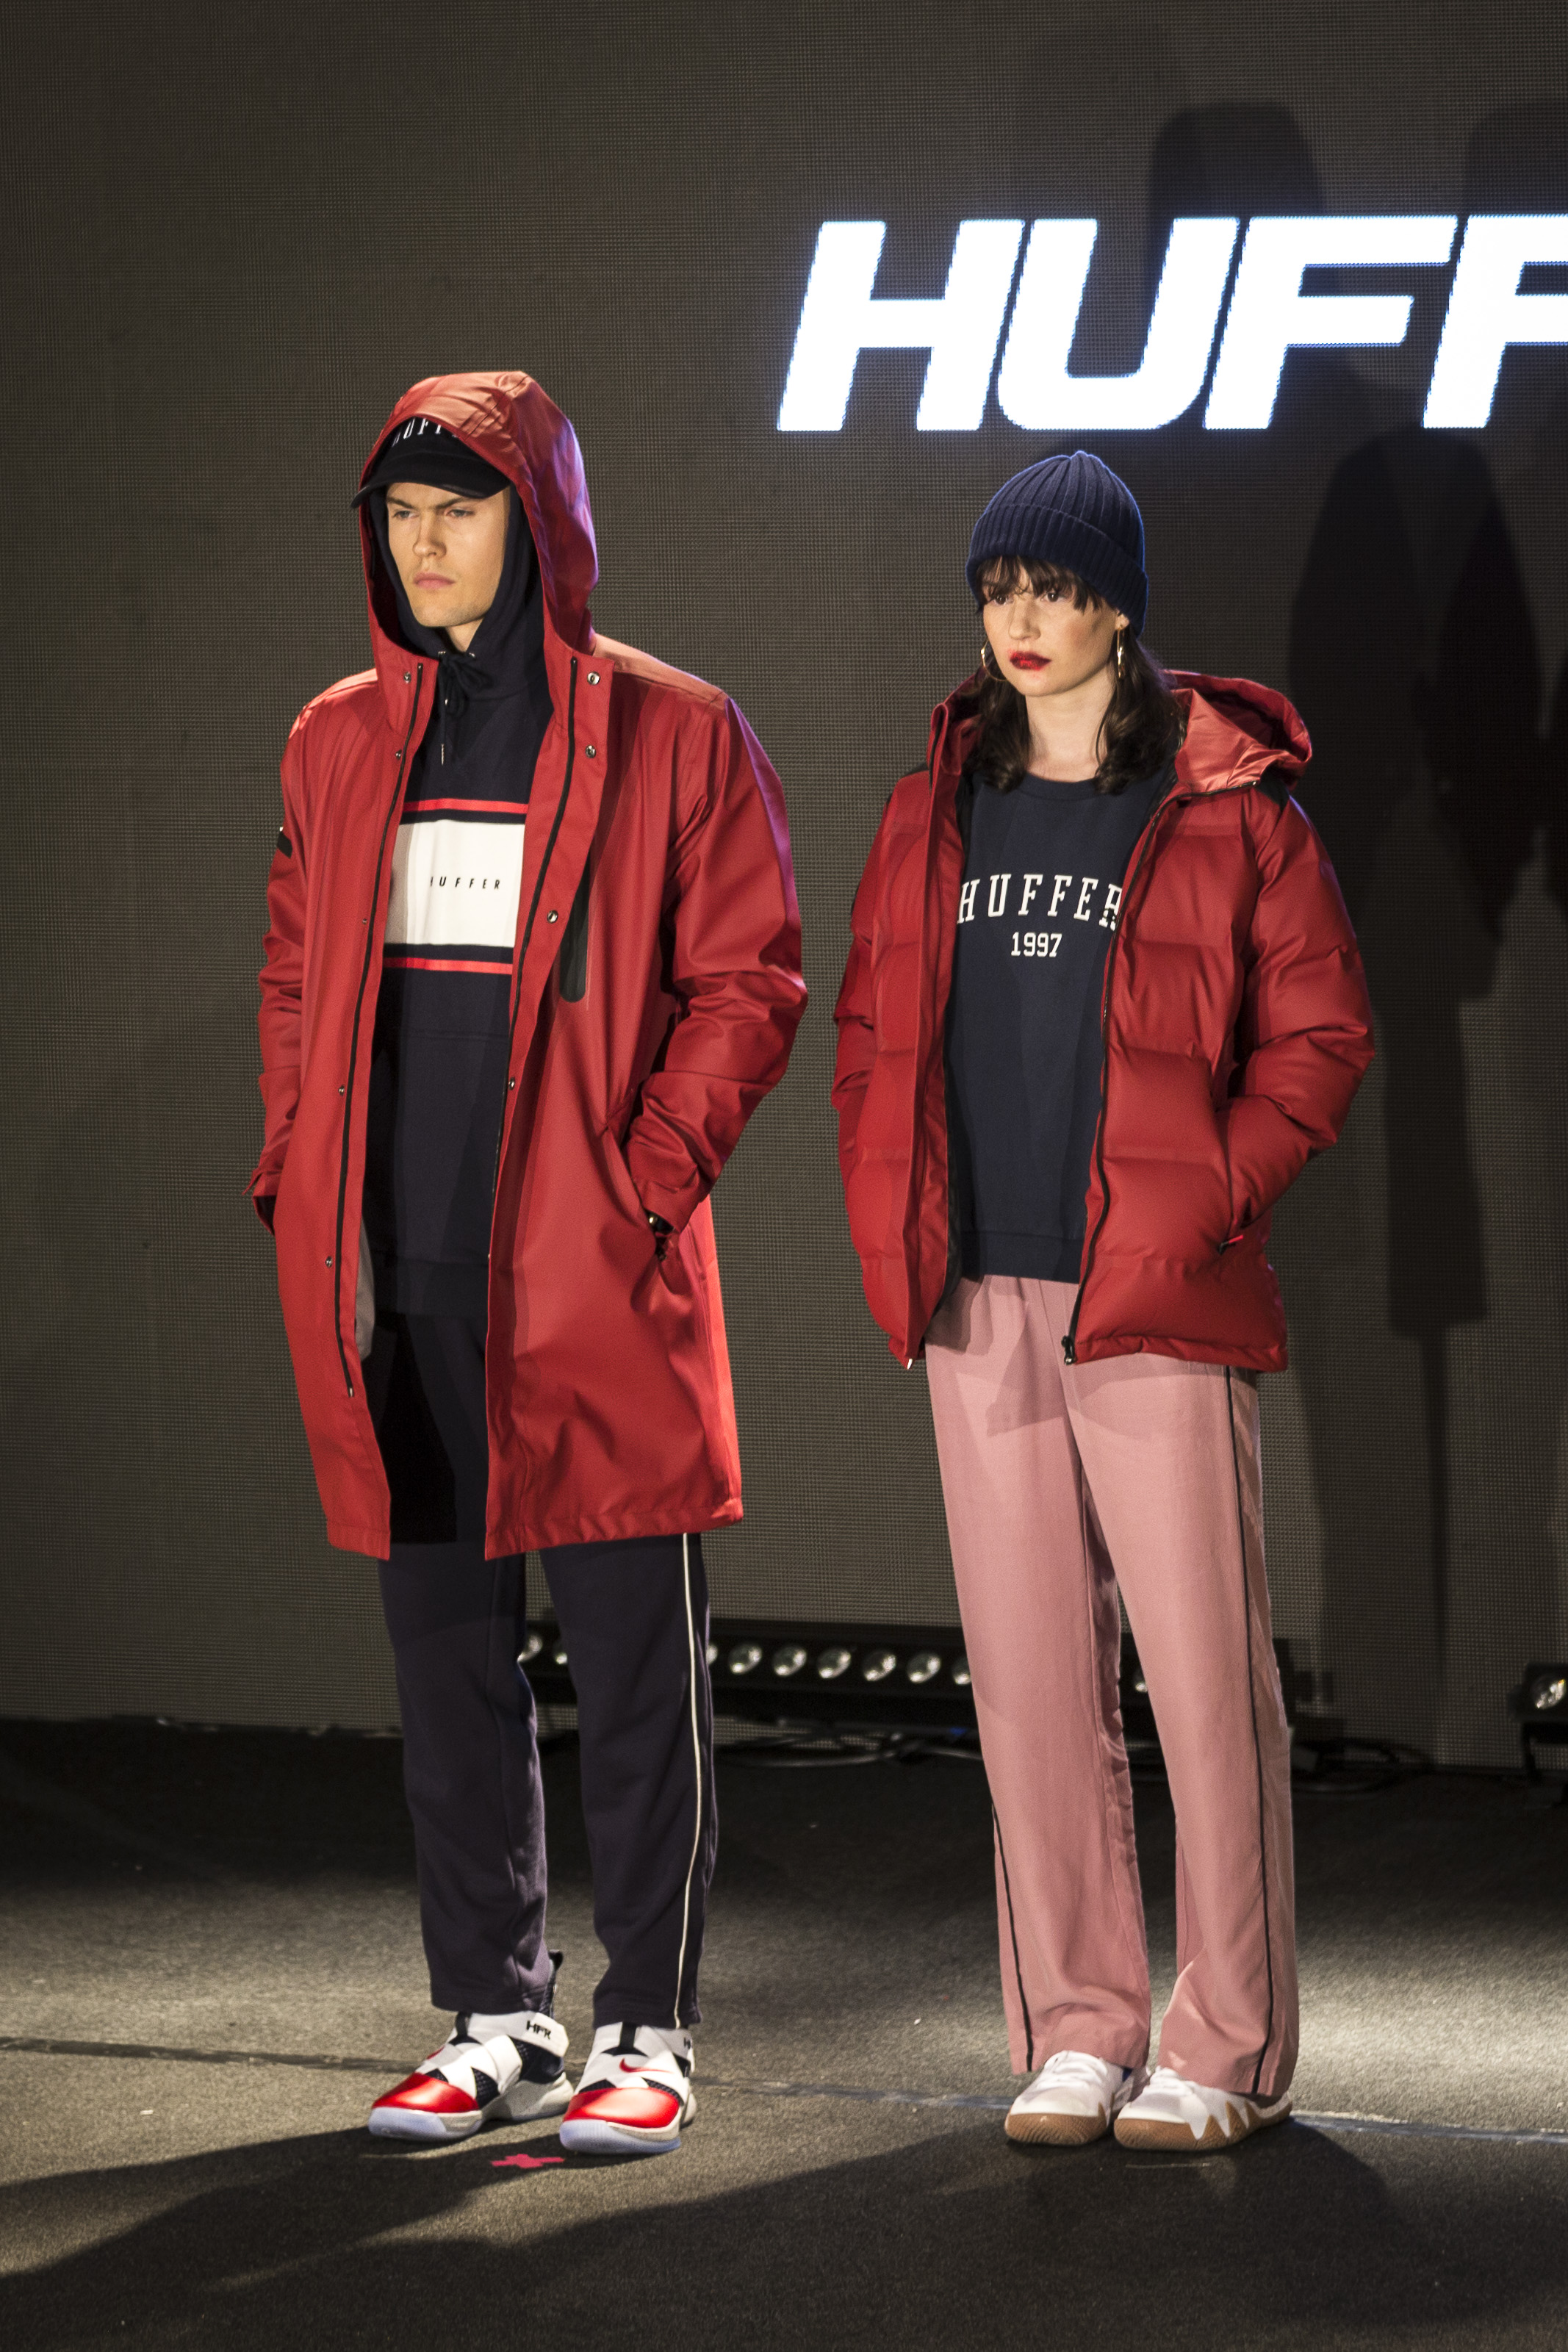 NZFW confirms streetwear is still going strong